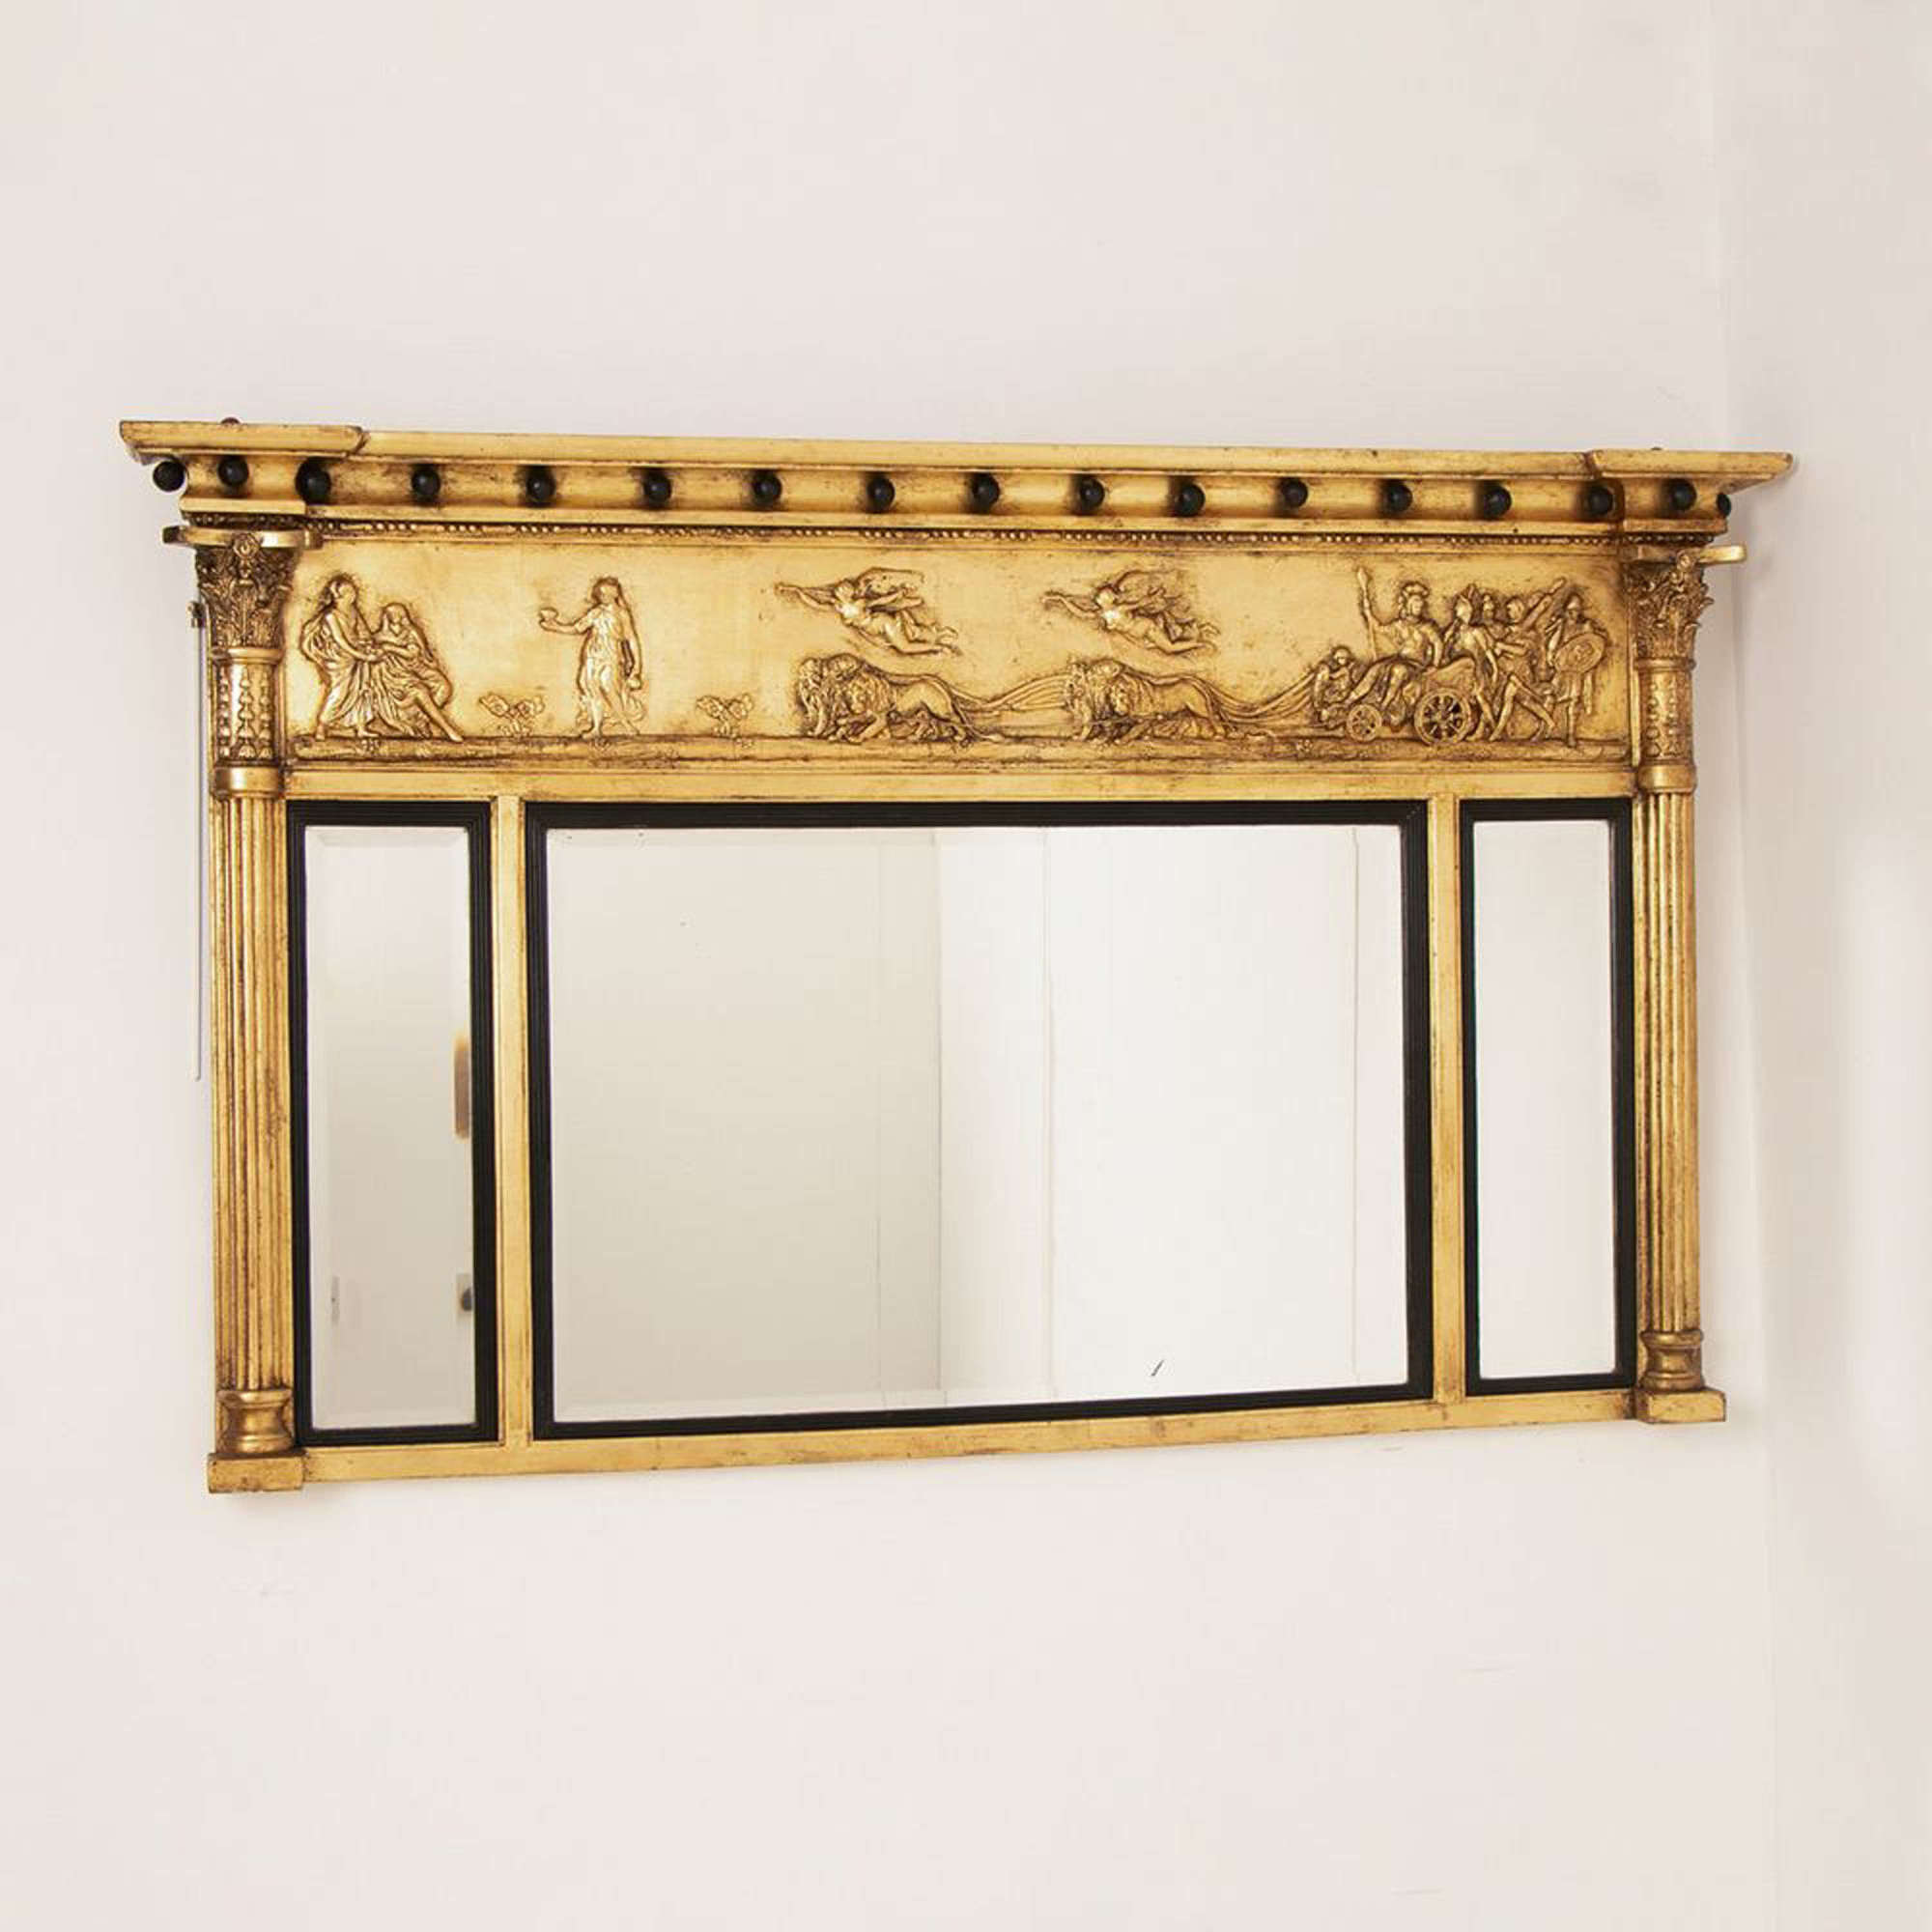 An Antique Gilded Triple Plate Wall Mirror with Chariot Frieze